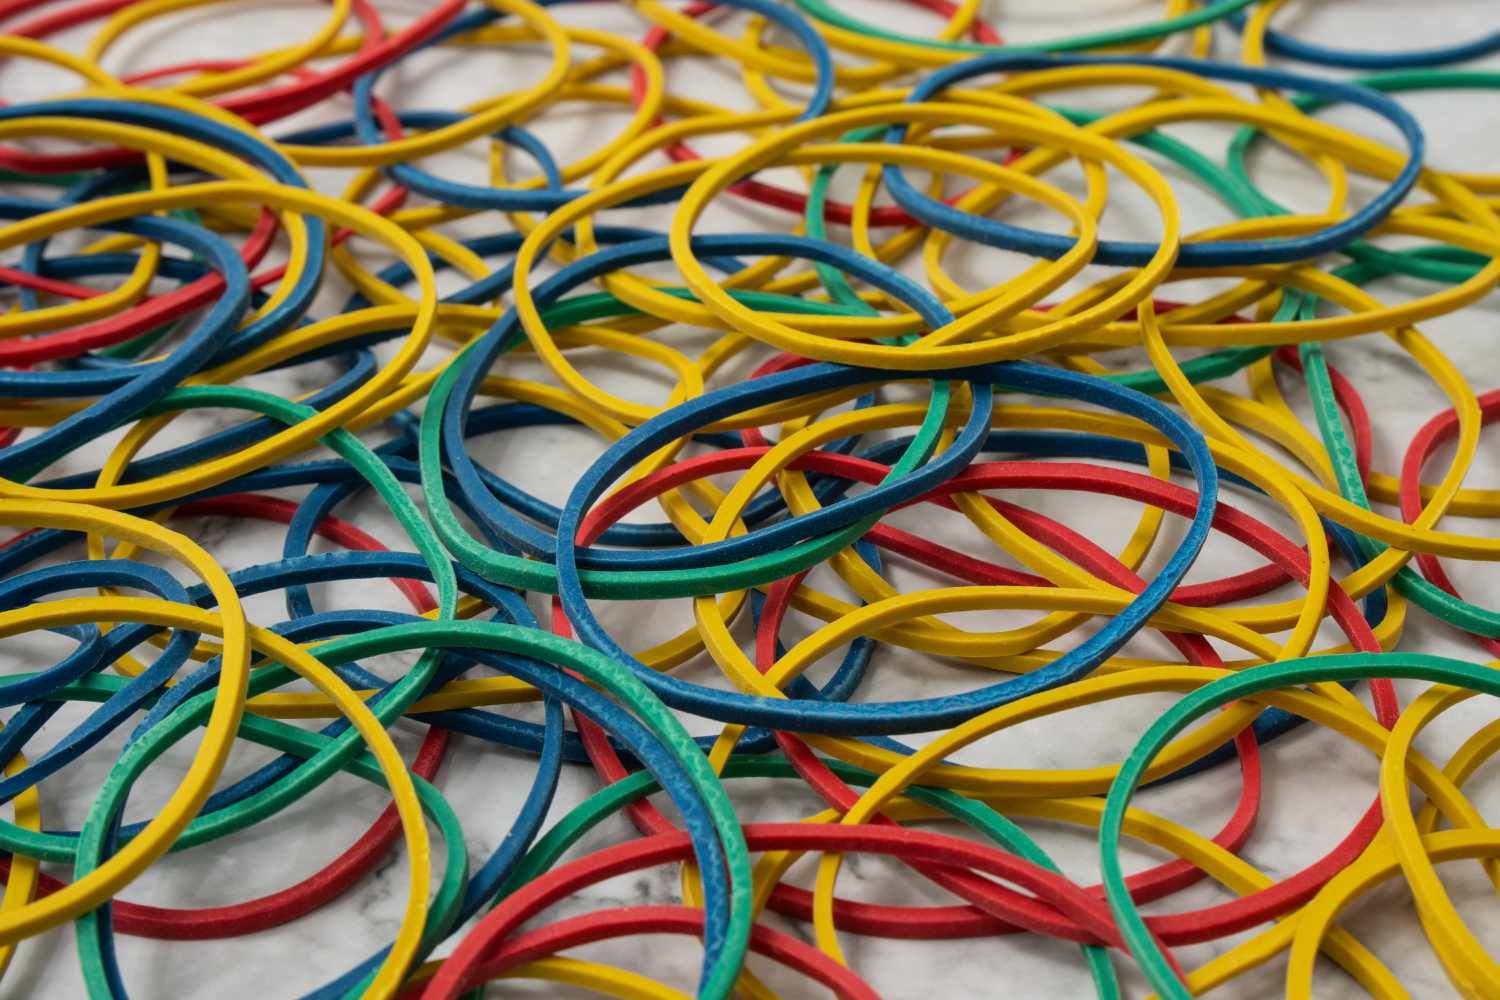 Pile of small round colorful rubber bands for making rainbow loom